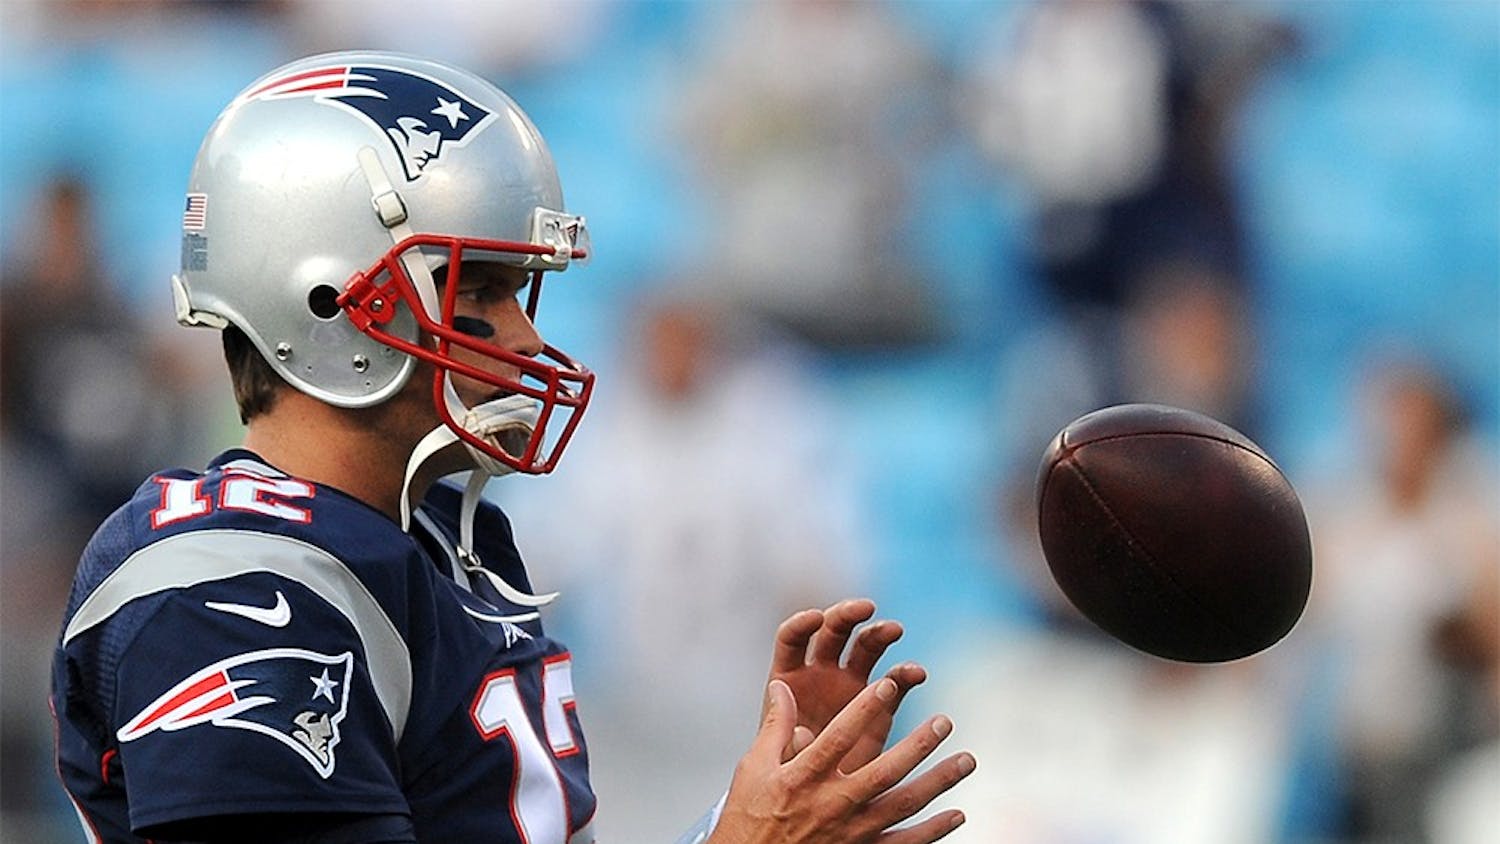 New England Patriots quarterback Tom Brady during a warmups prior to preseason action against the Carolina Panthers on Aug. 28 at Bank of America Stadium in Charlotte, N.C. Four games into the NFL season, Brady leads in passing yards and tied for second in touchdowns.